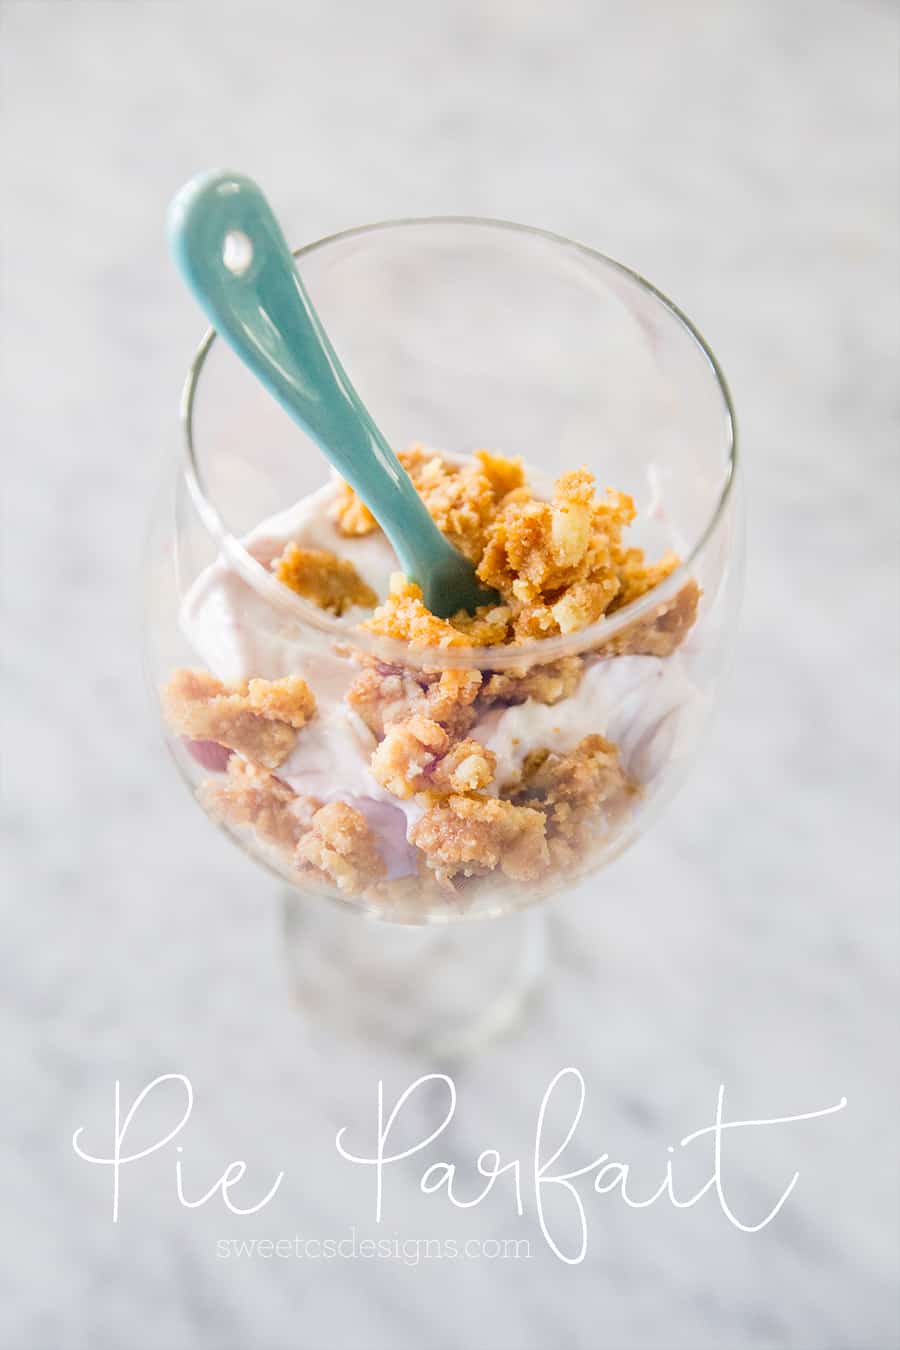 Pie for breakfast? Yes please! This Pie Parfait looks so delicious!